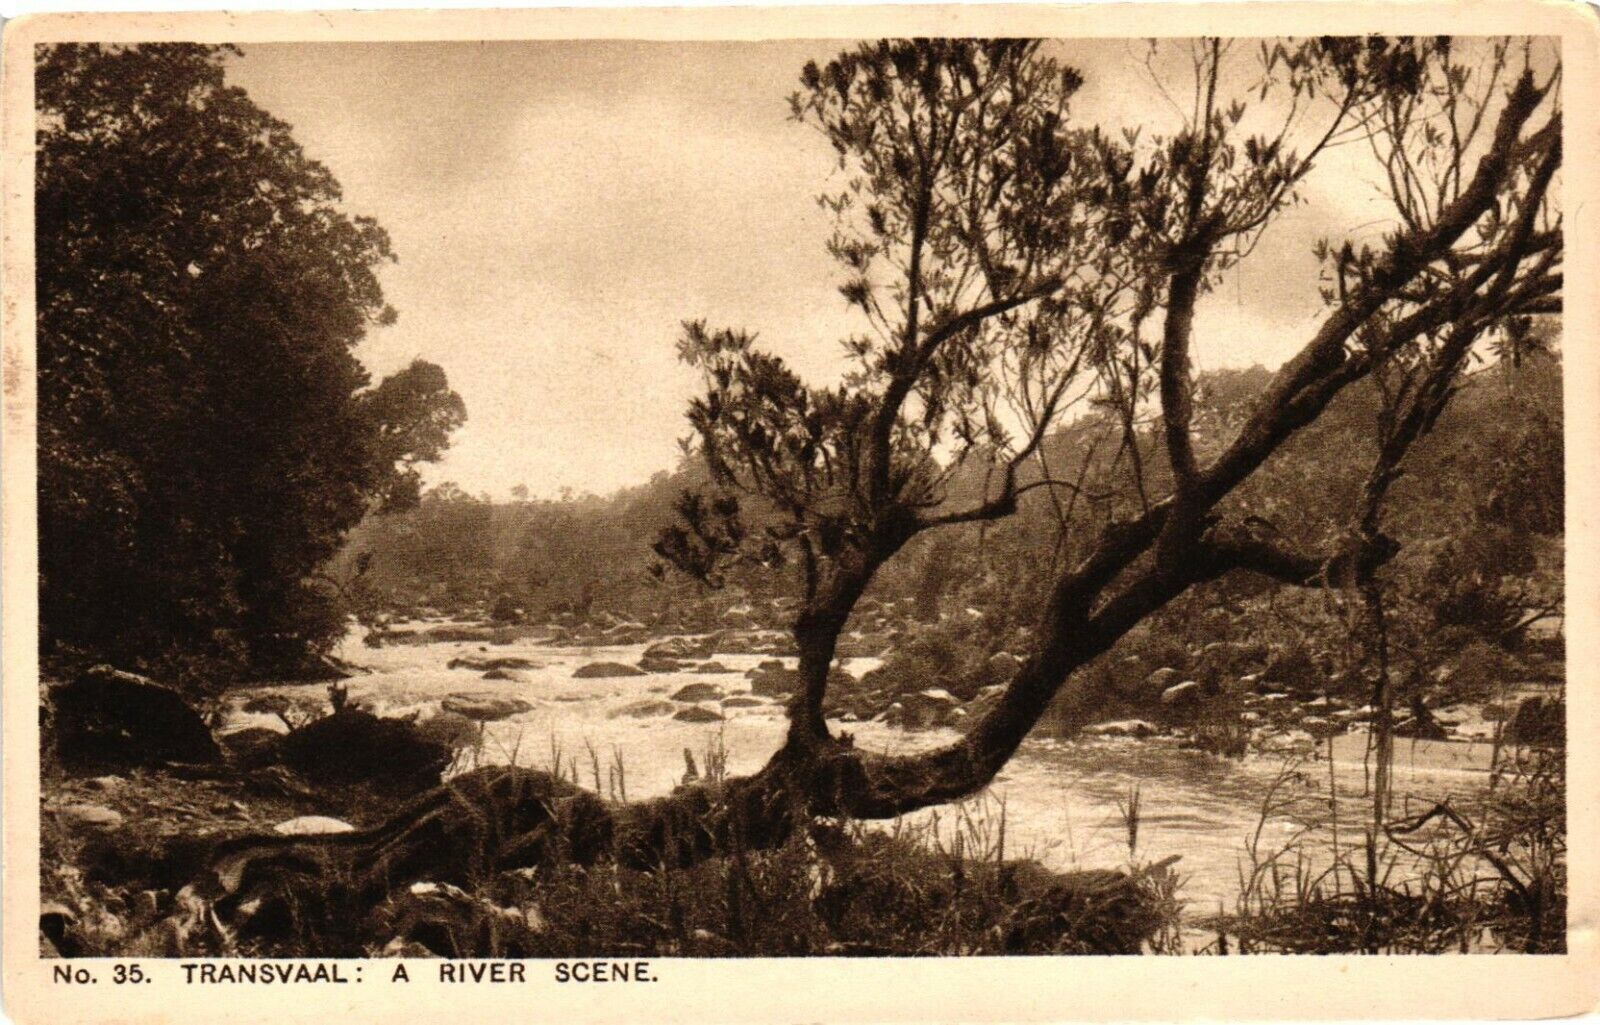 Vintage Postcard- No 35. Transvaal: A River Scene. Unposted 1920